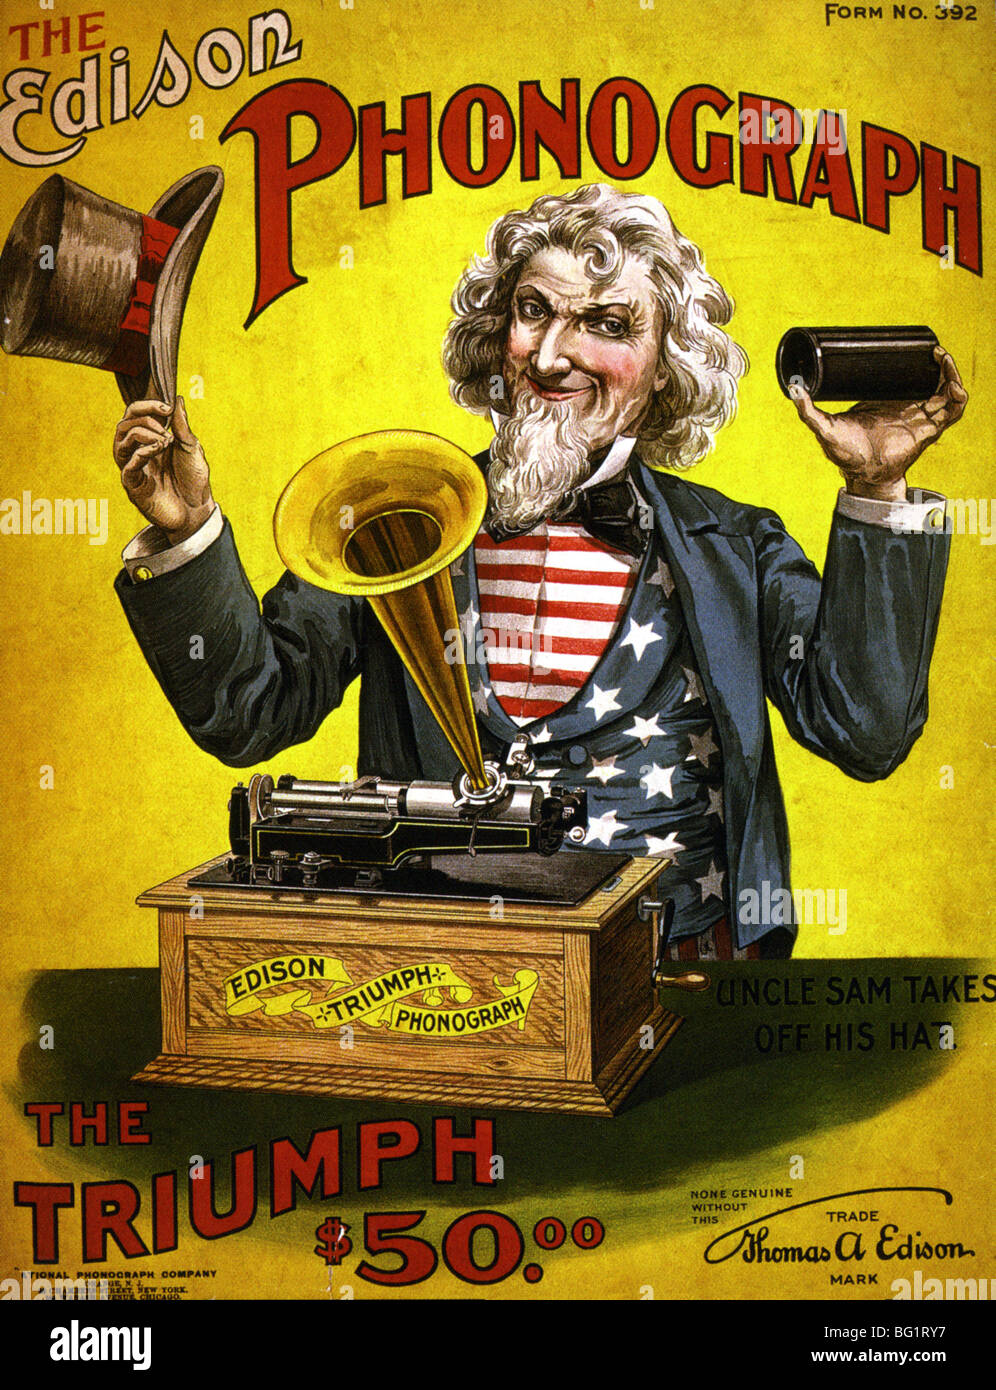 EDISON PHONOGRAPH advert  about 1900 with Uncle Sam figure promoting the Triumph cylinder model for $50 Stock Photo